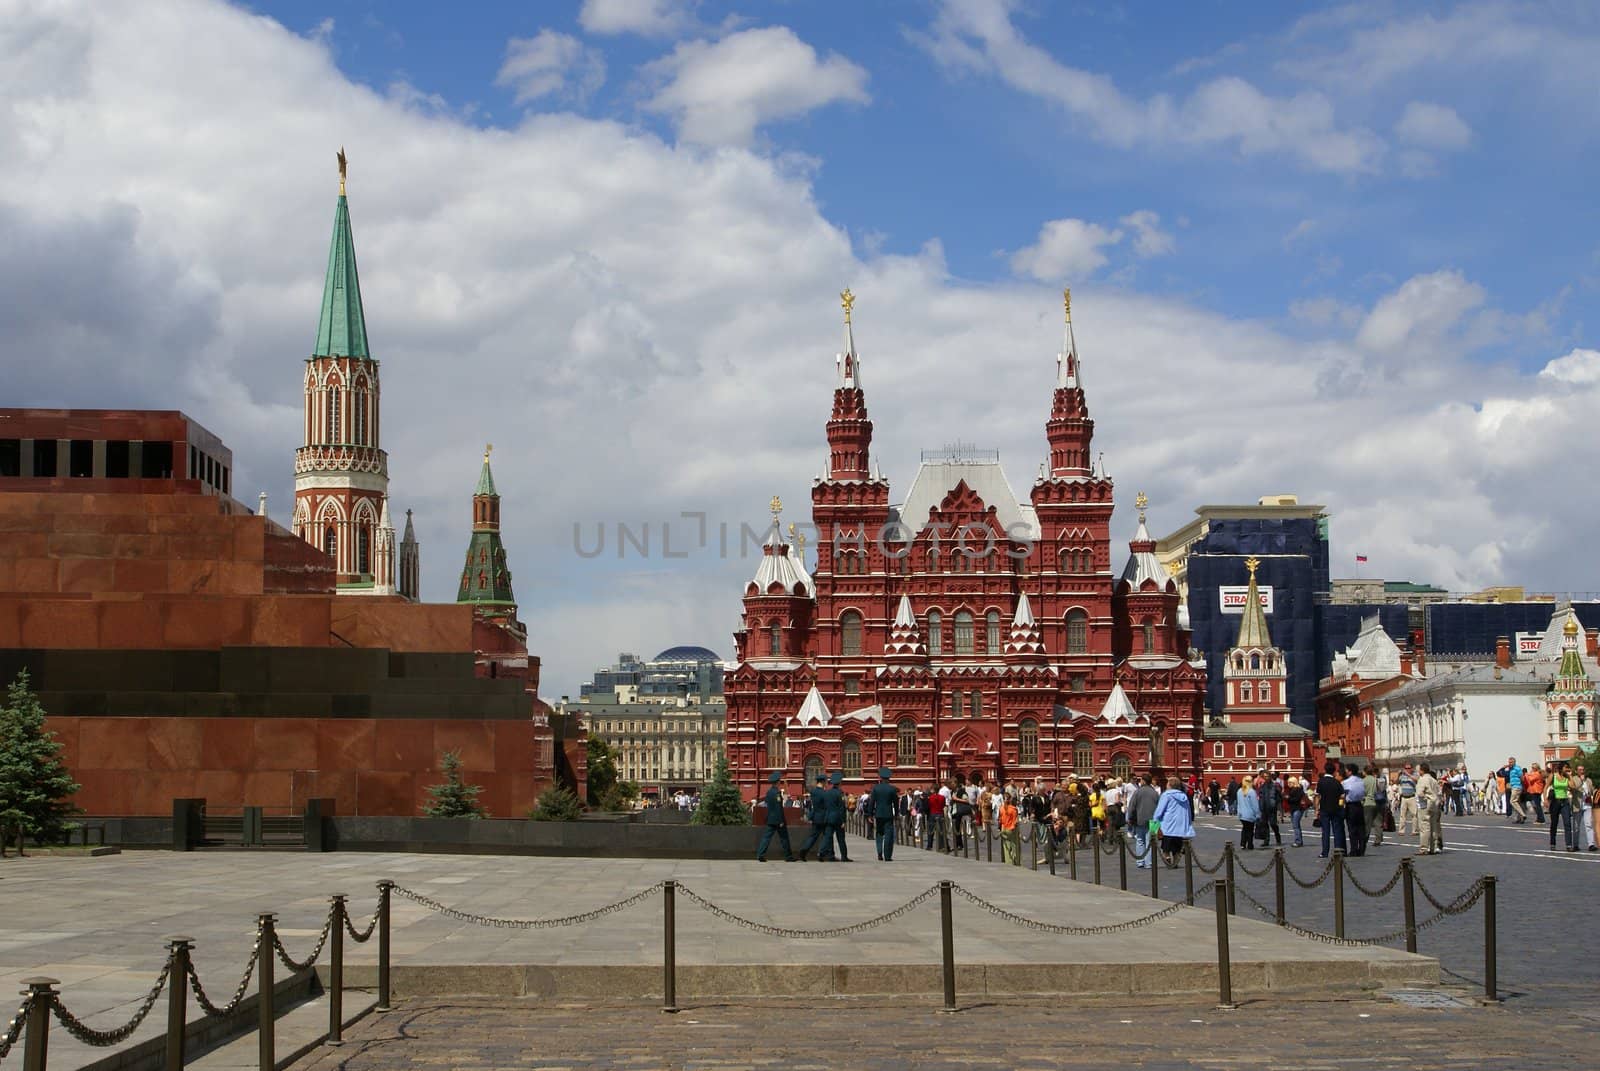 Moscow. Kremlin wall and towers on red square 